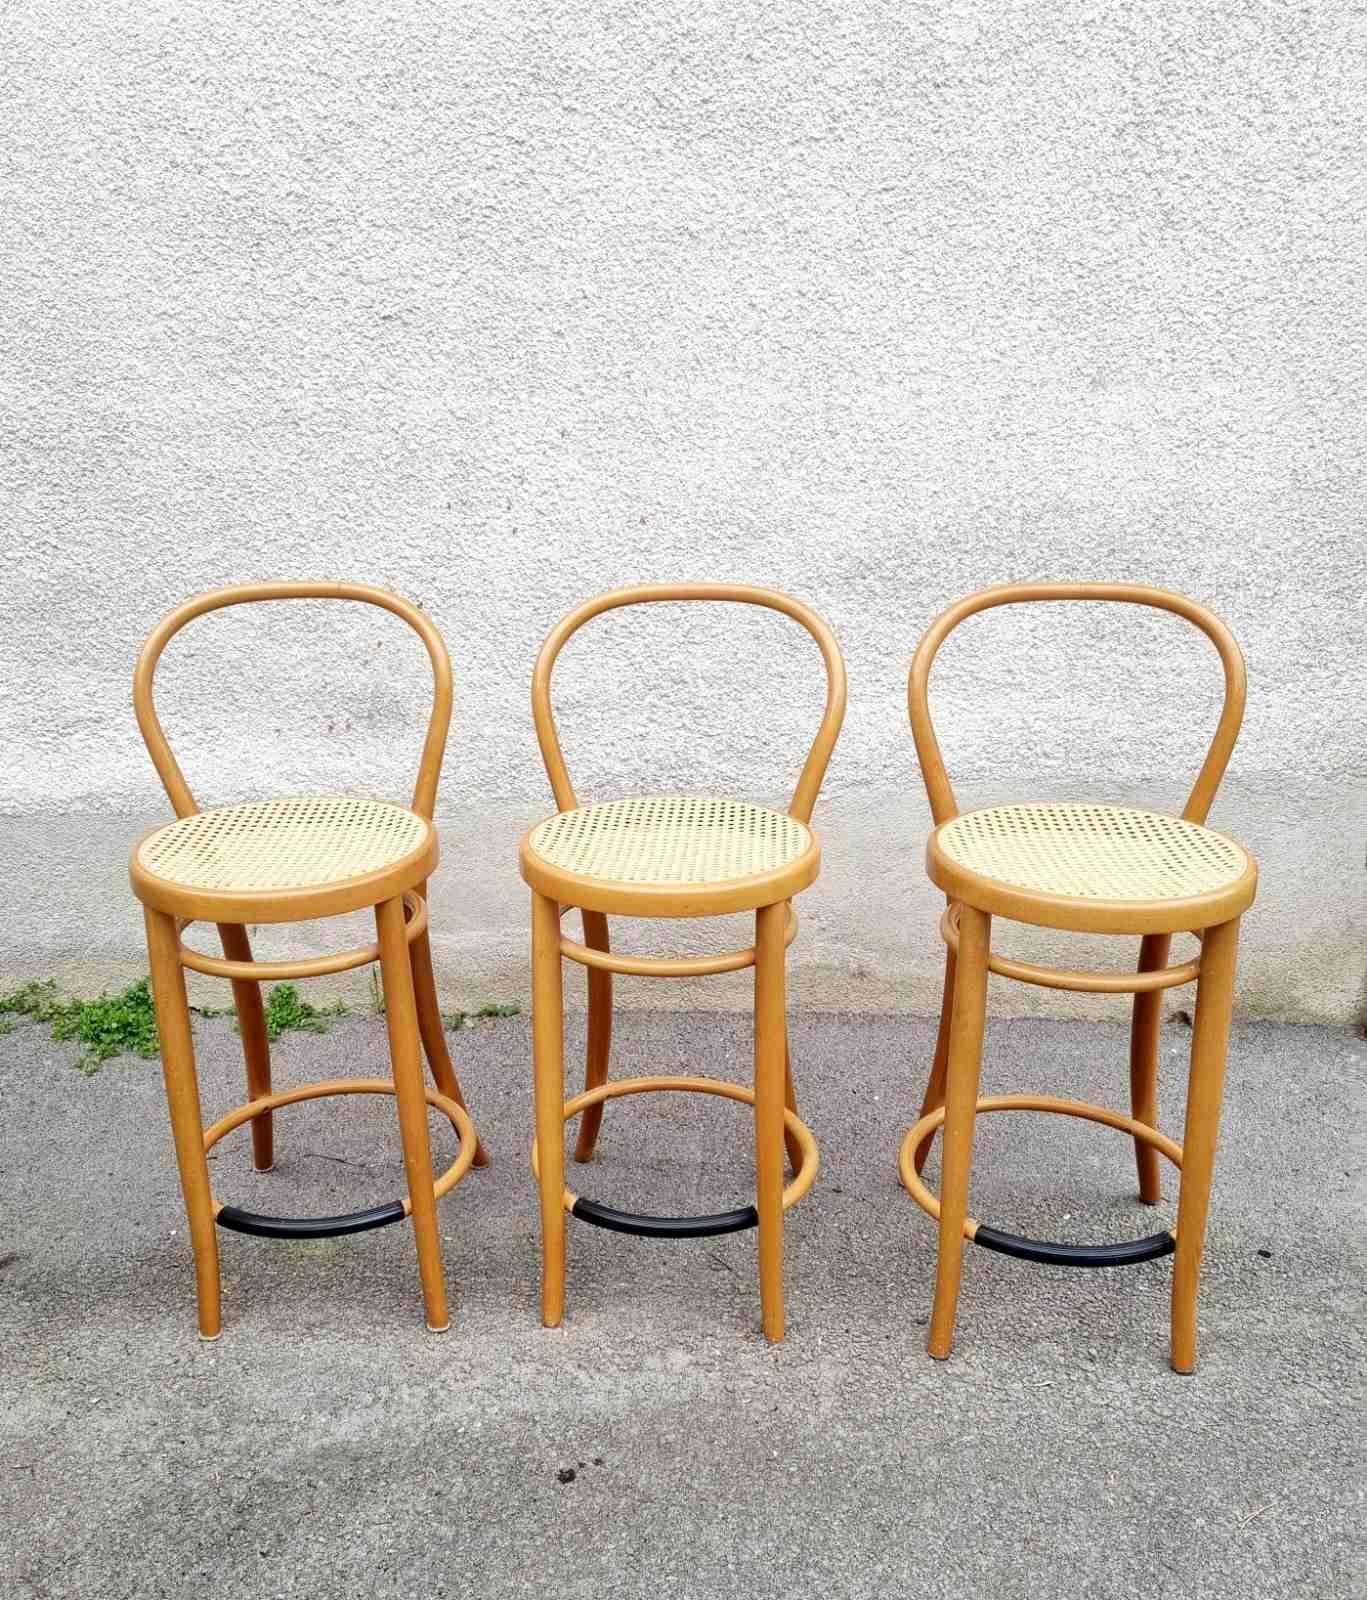 This three beautiful vintage Thonet style, Wooden Stools were made in Italy in '80s.
They are made of brown bentwood and beige wicker.

*Price is for one Stool.

Stool is very comfortable and perfect vintage addition for every room in your home or